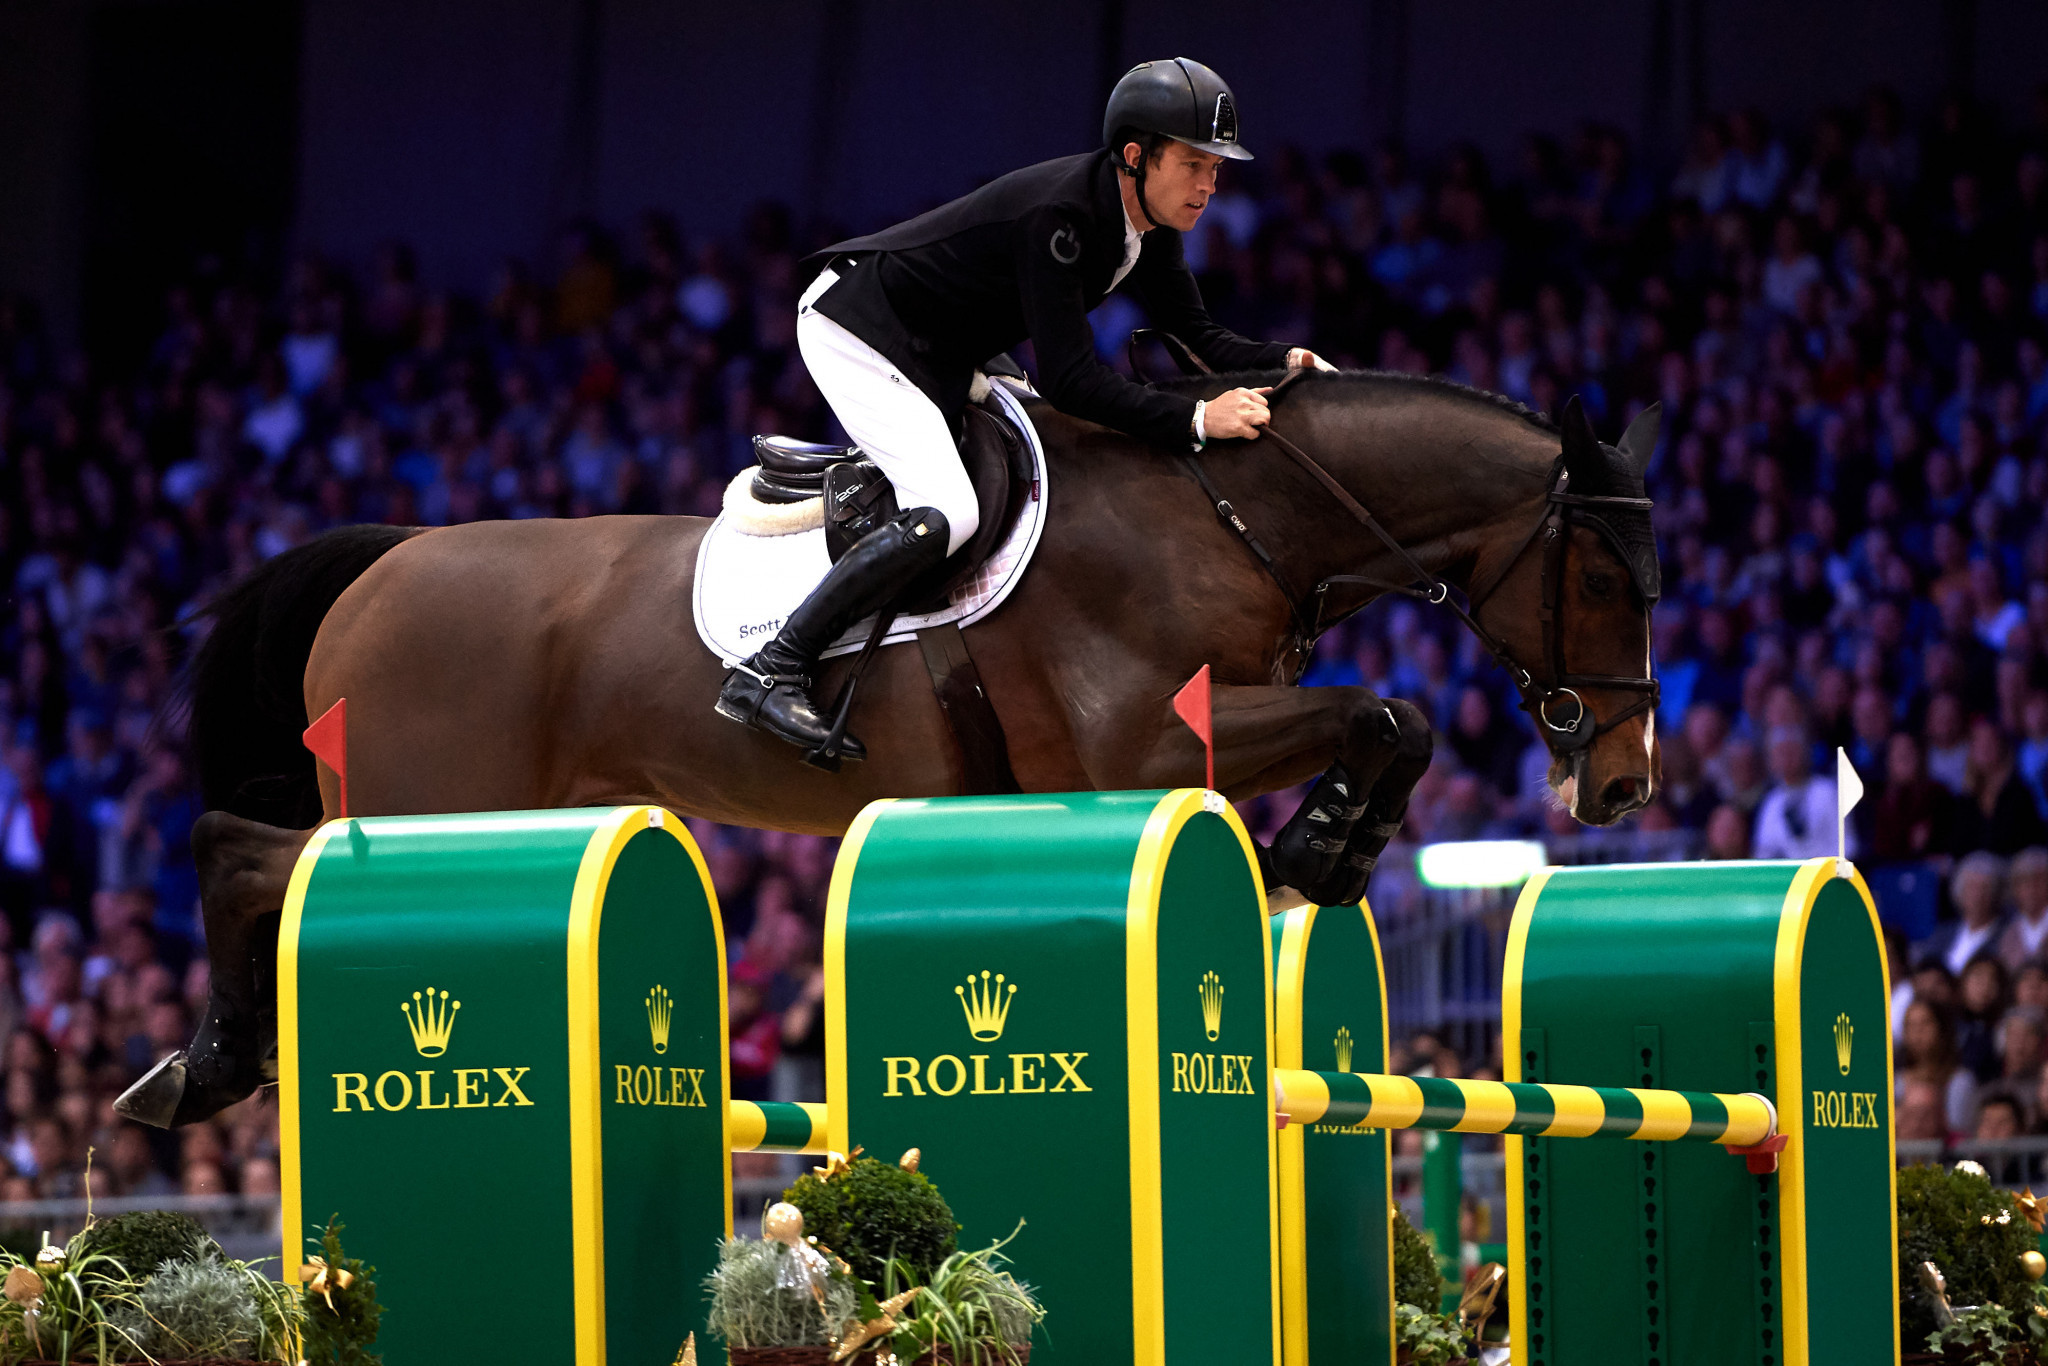 Scott Brash returns to Global Champions Tour action after skipping the Paris leg ©Getty Images